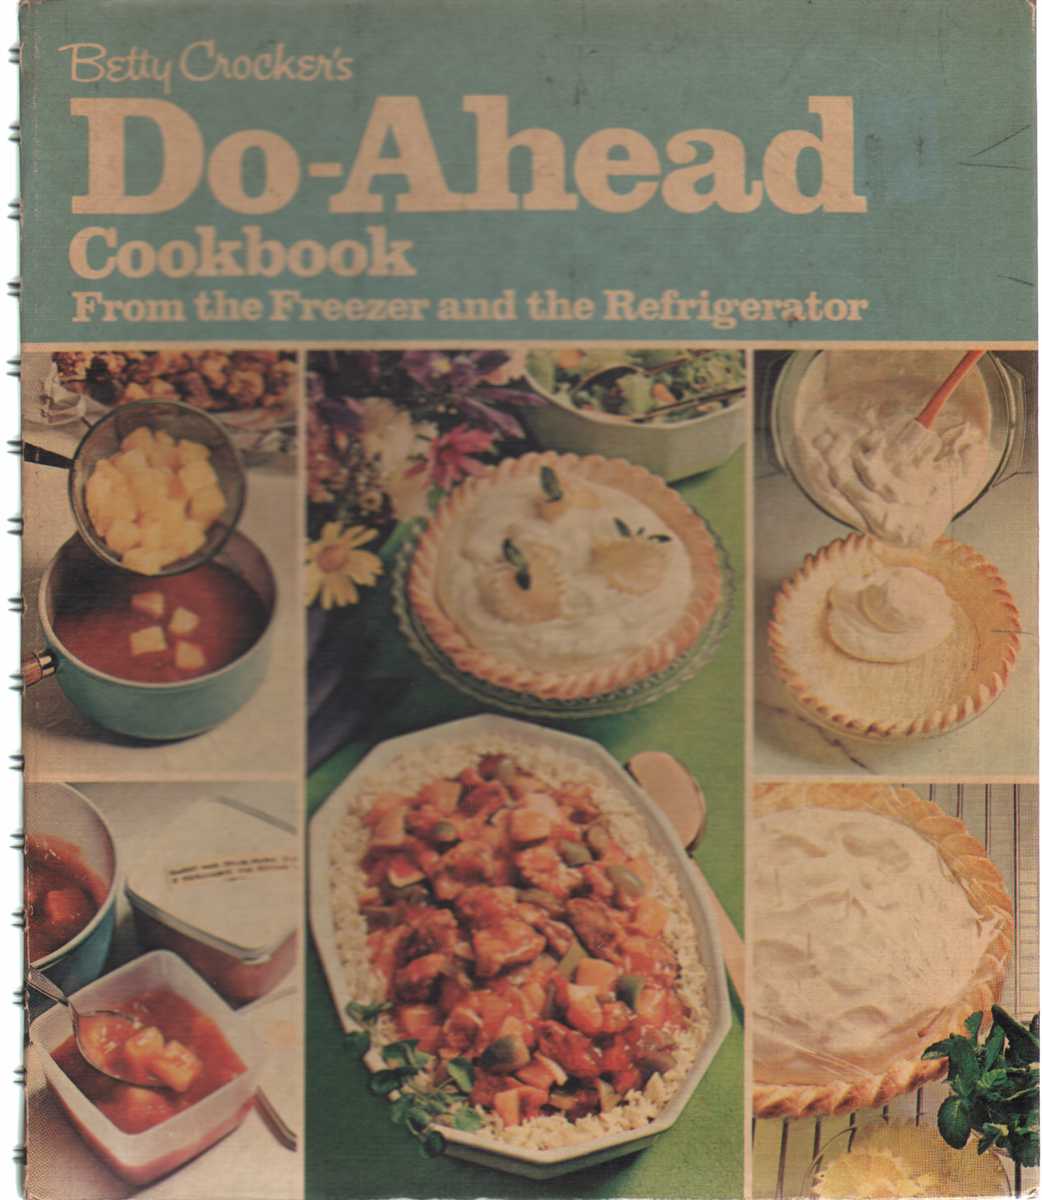 Image for BETTY CROCKER'S DO-AHEAD COOKBOOK From the Freezer and the Refrigerator